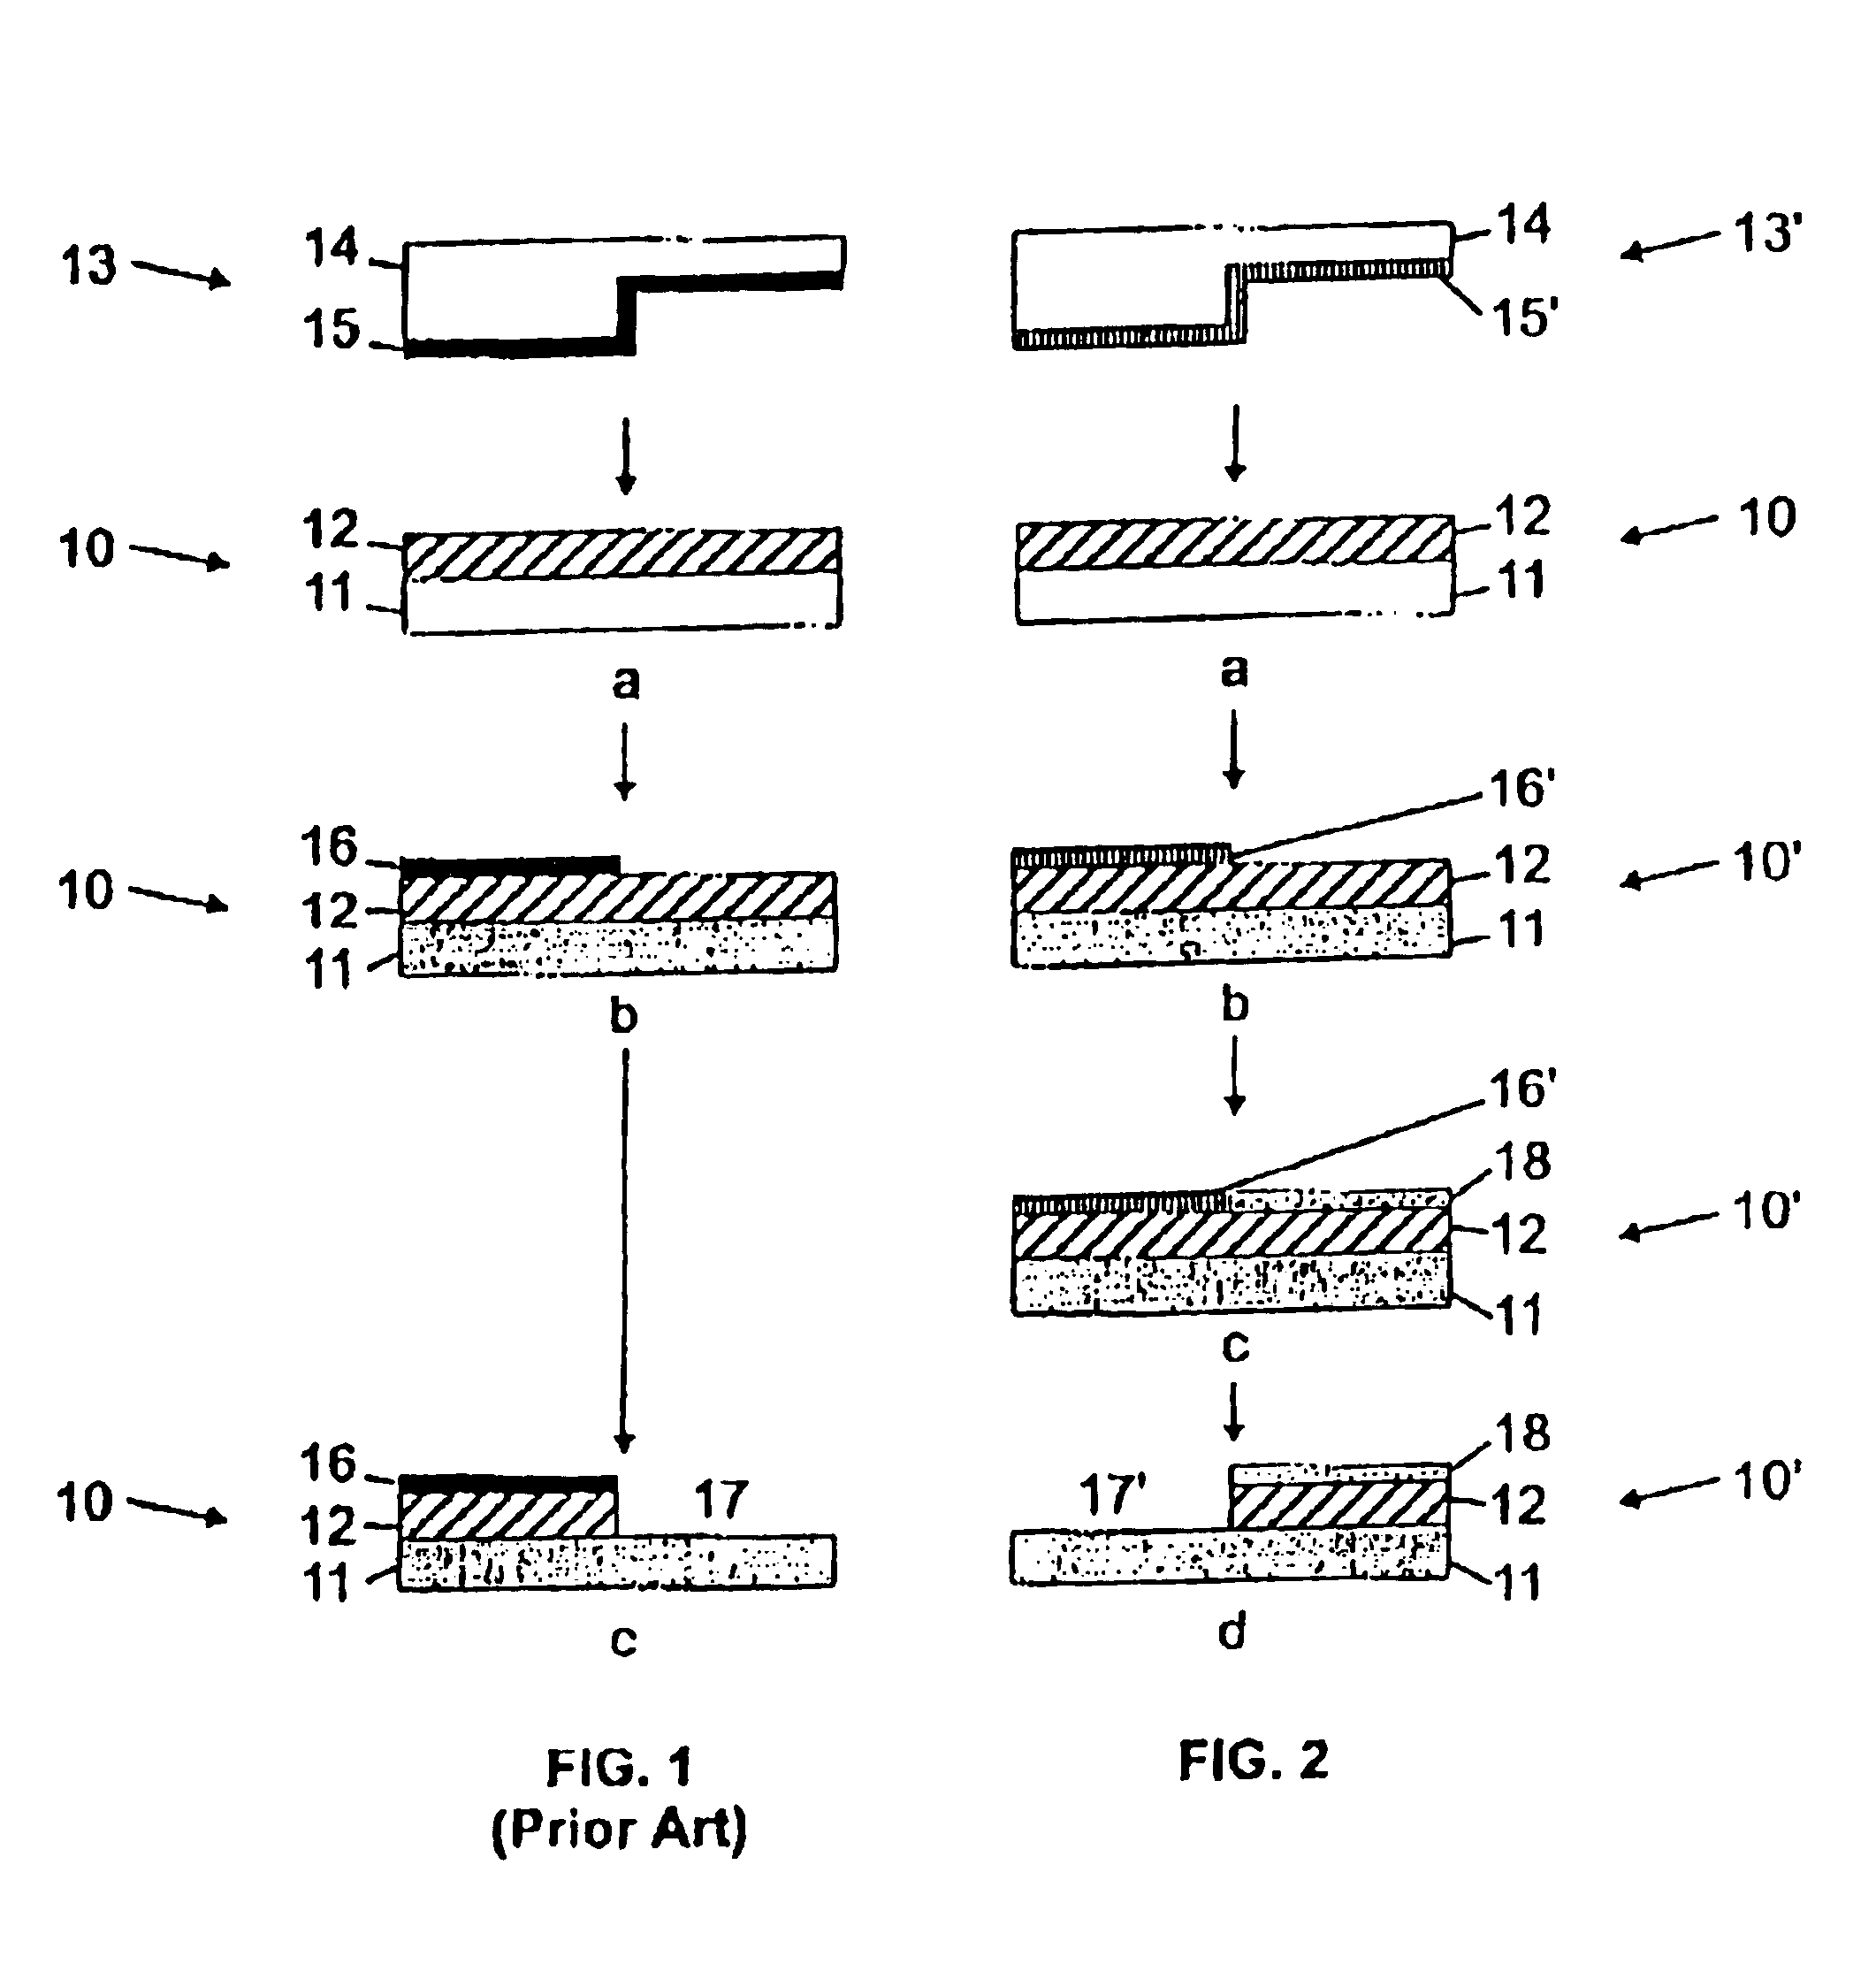 Method of patterning the surface of an article using positive microcontact printing